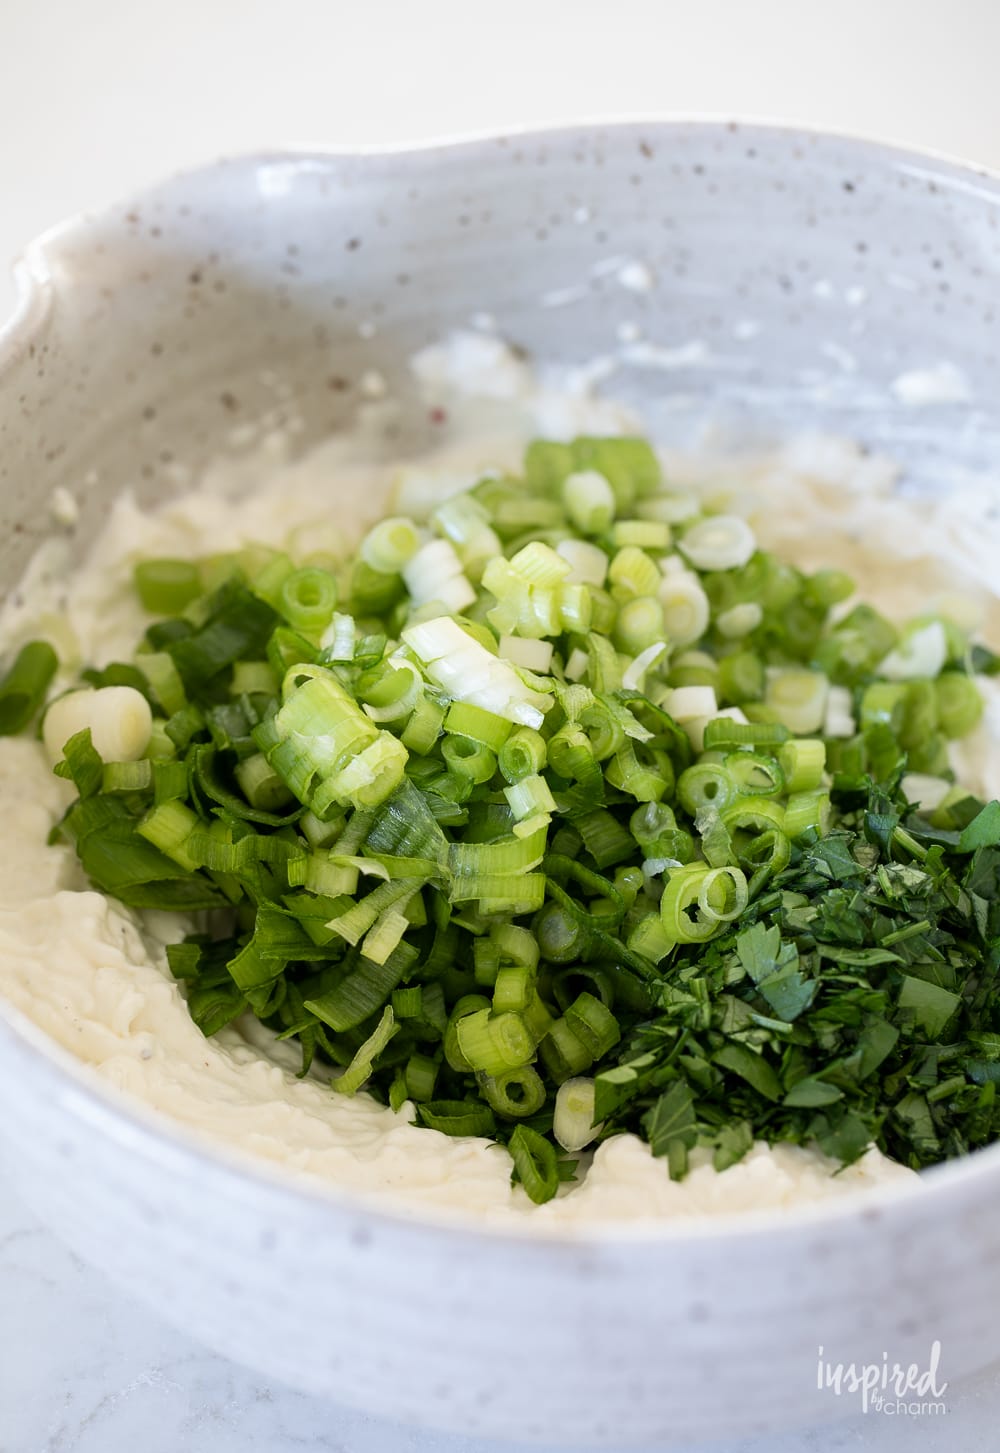 mixing green onion dip in a bowl.